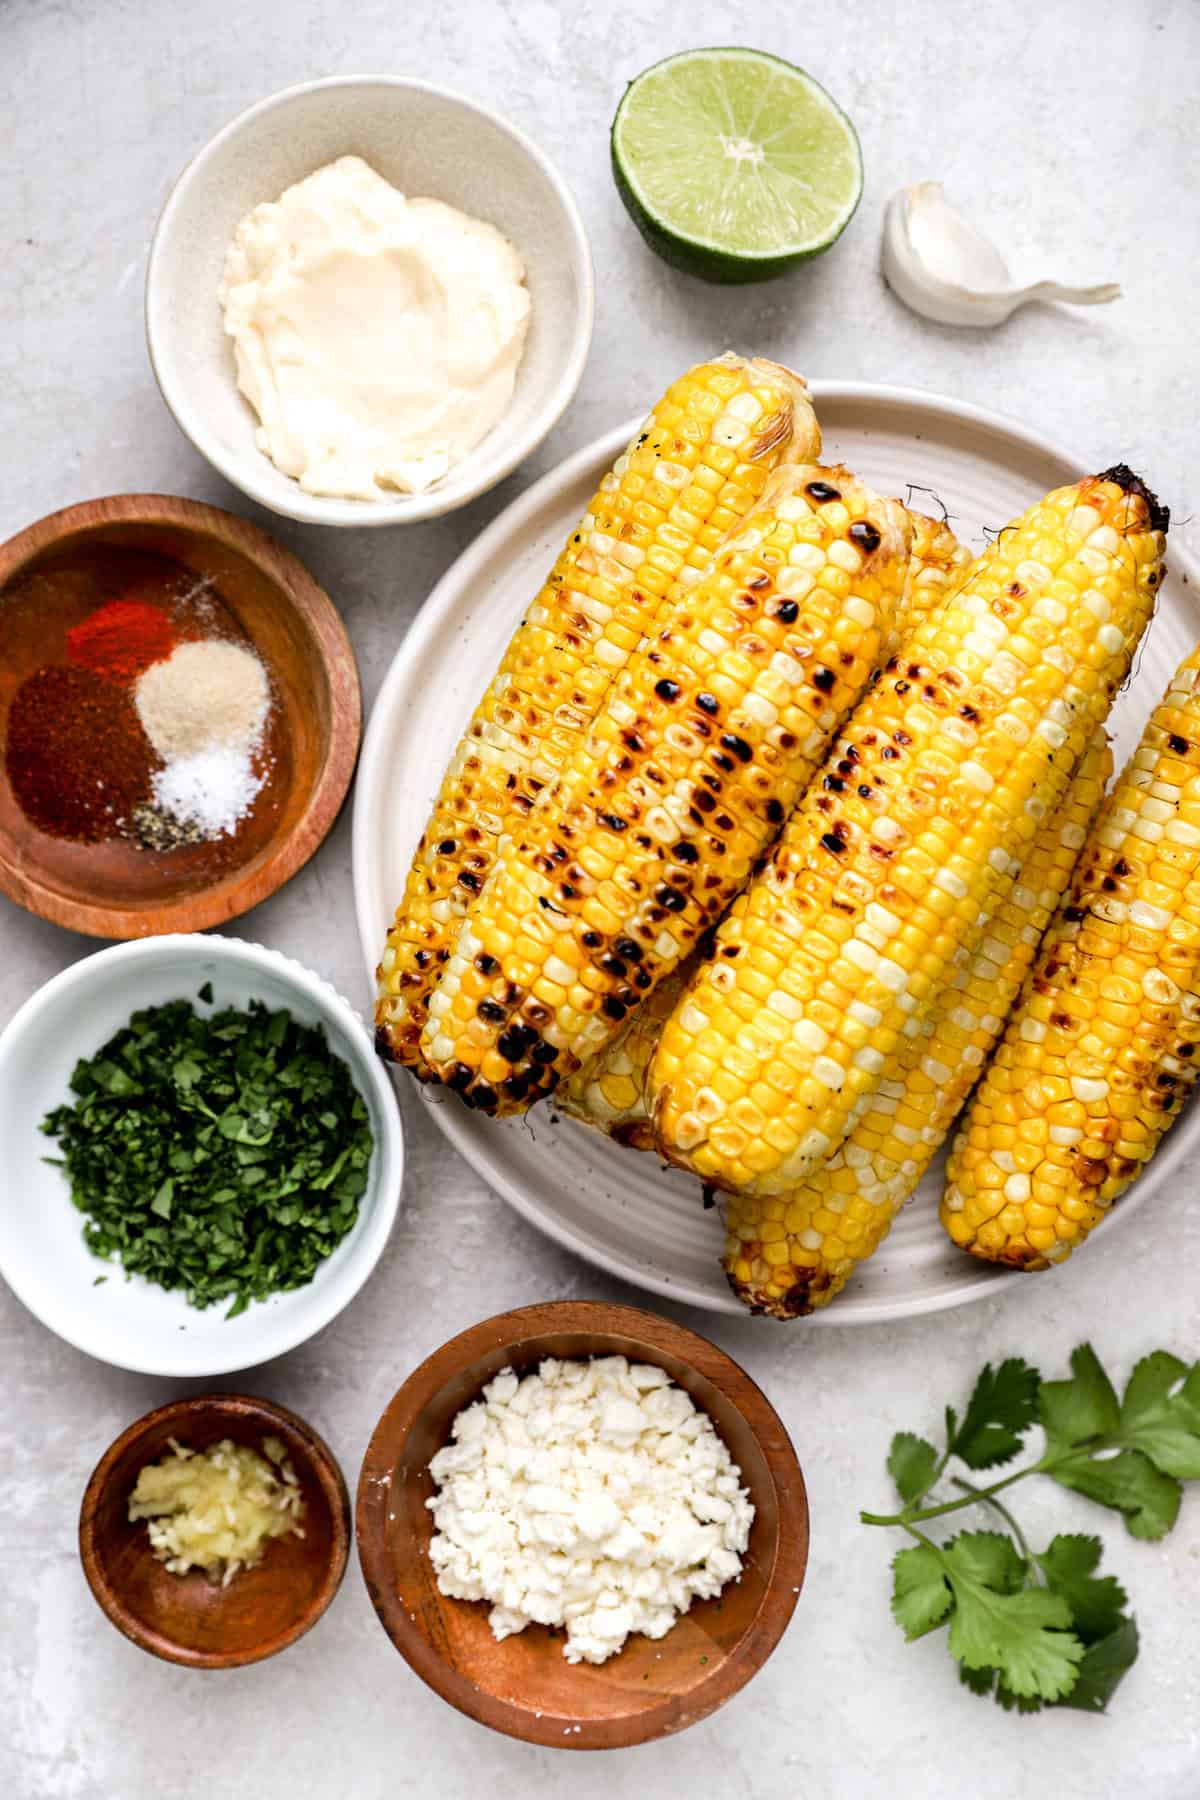 above image of grilled corn on the cob piled on a plate surrounded by street corn salad ingredients.